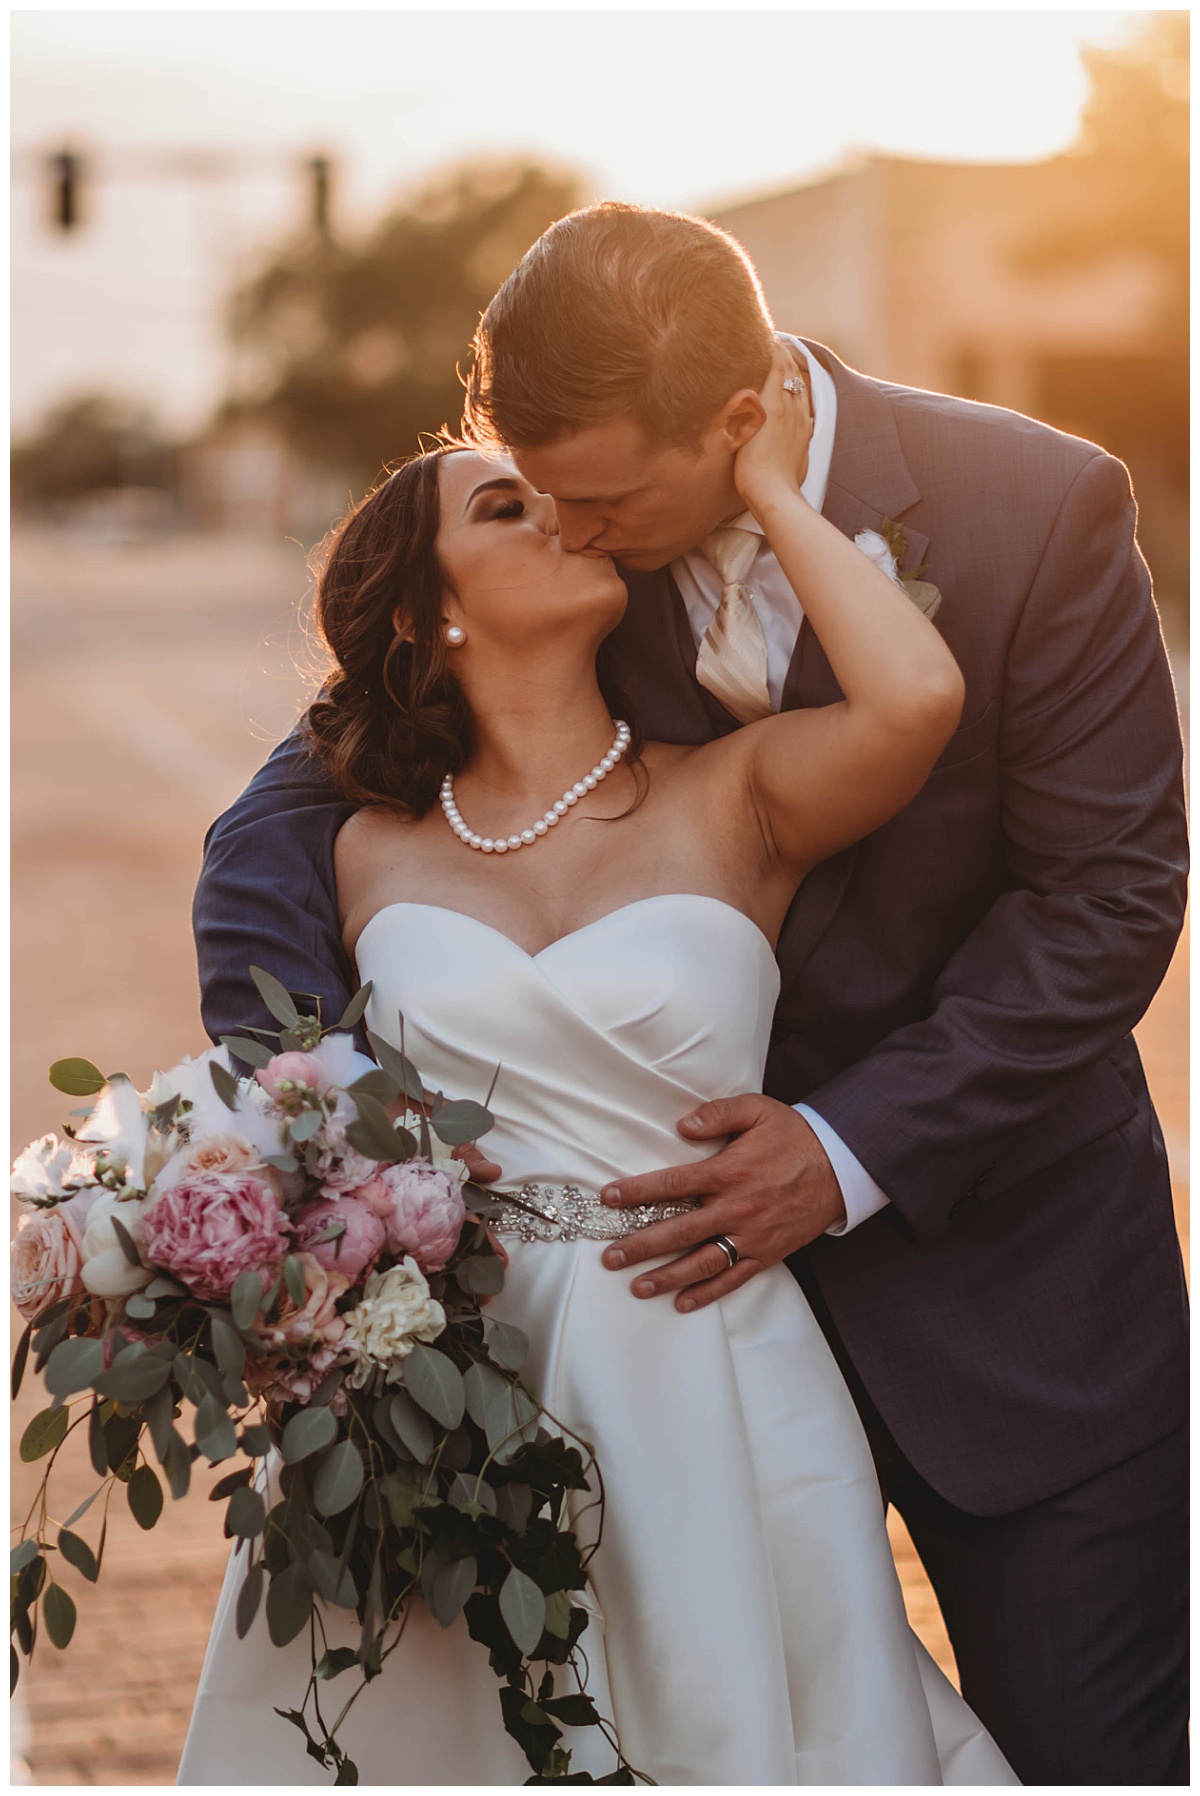 Newlyweds kiss in golden light on street at upscale Texas wedding